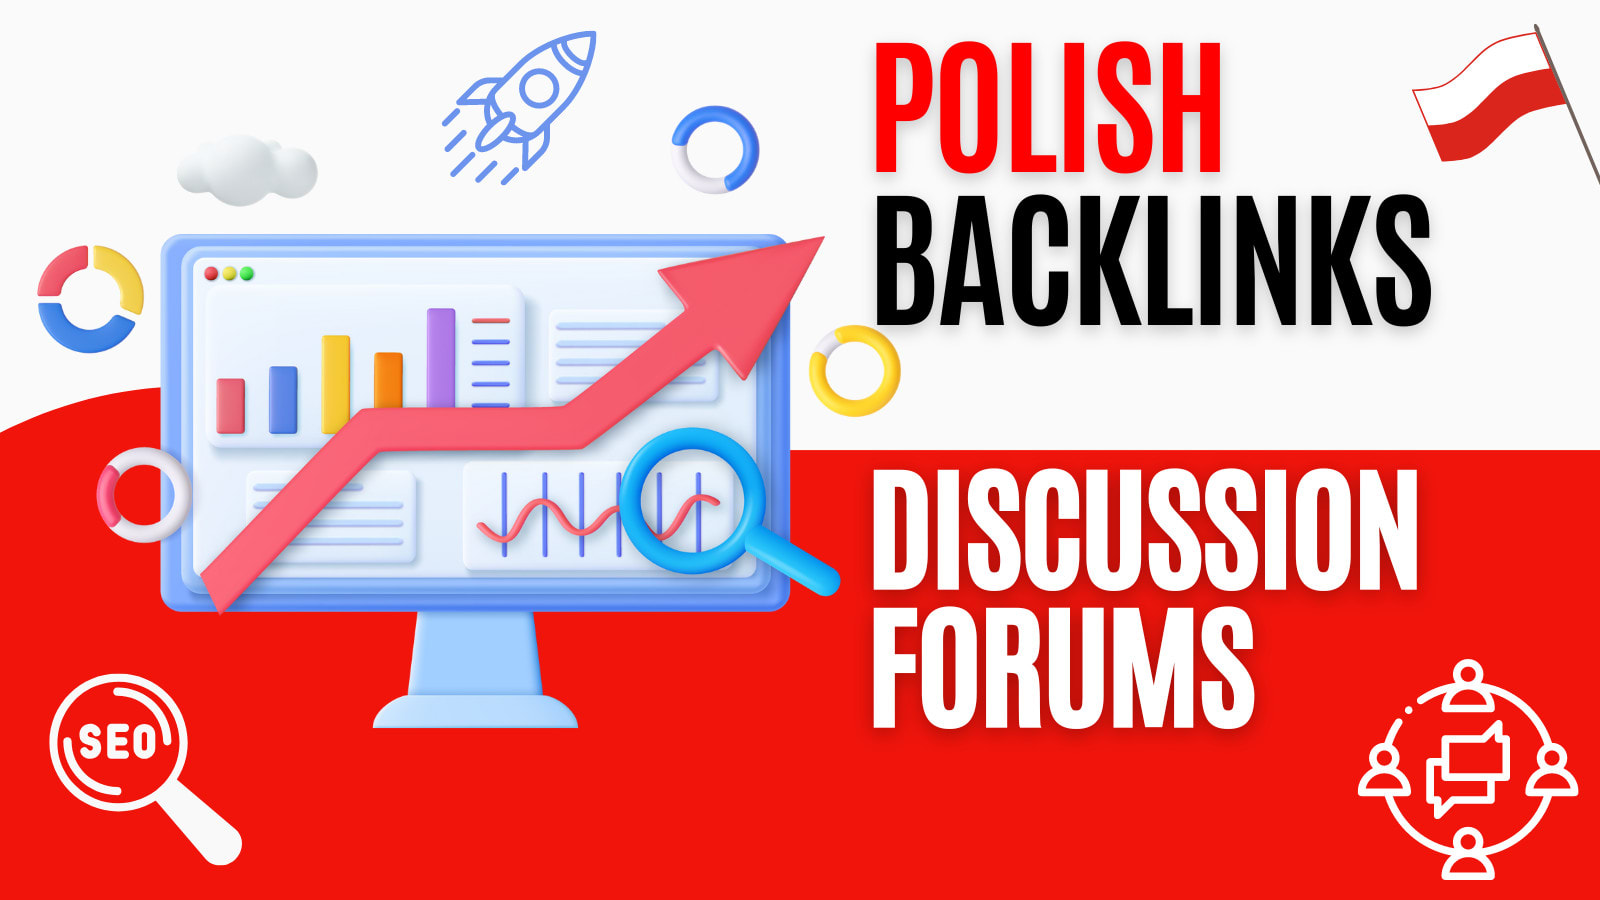 I will do 25-75 backlinks on polish discussion forums